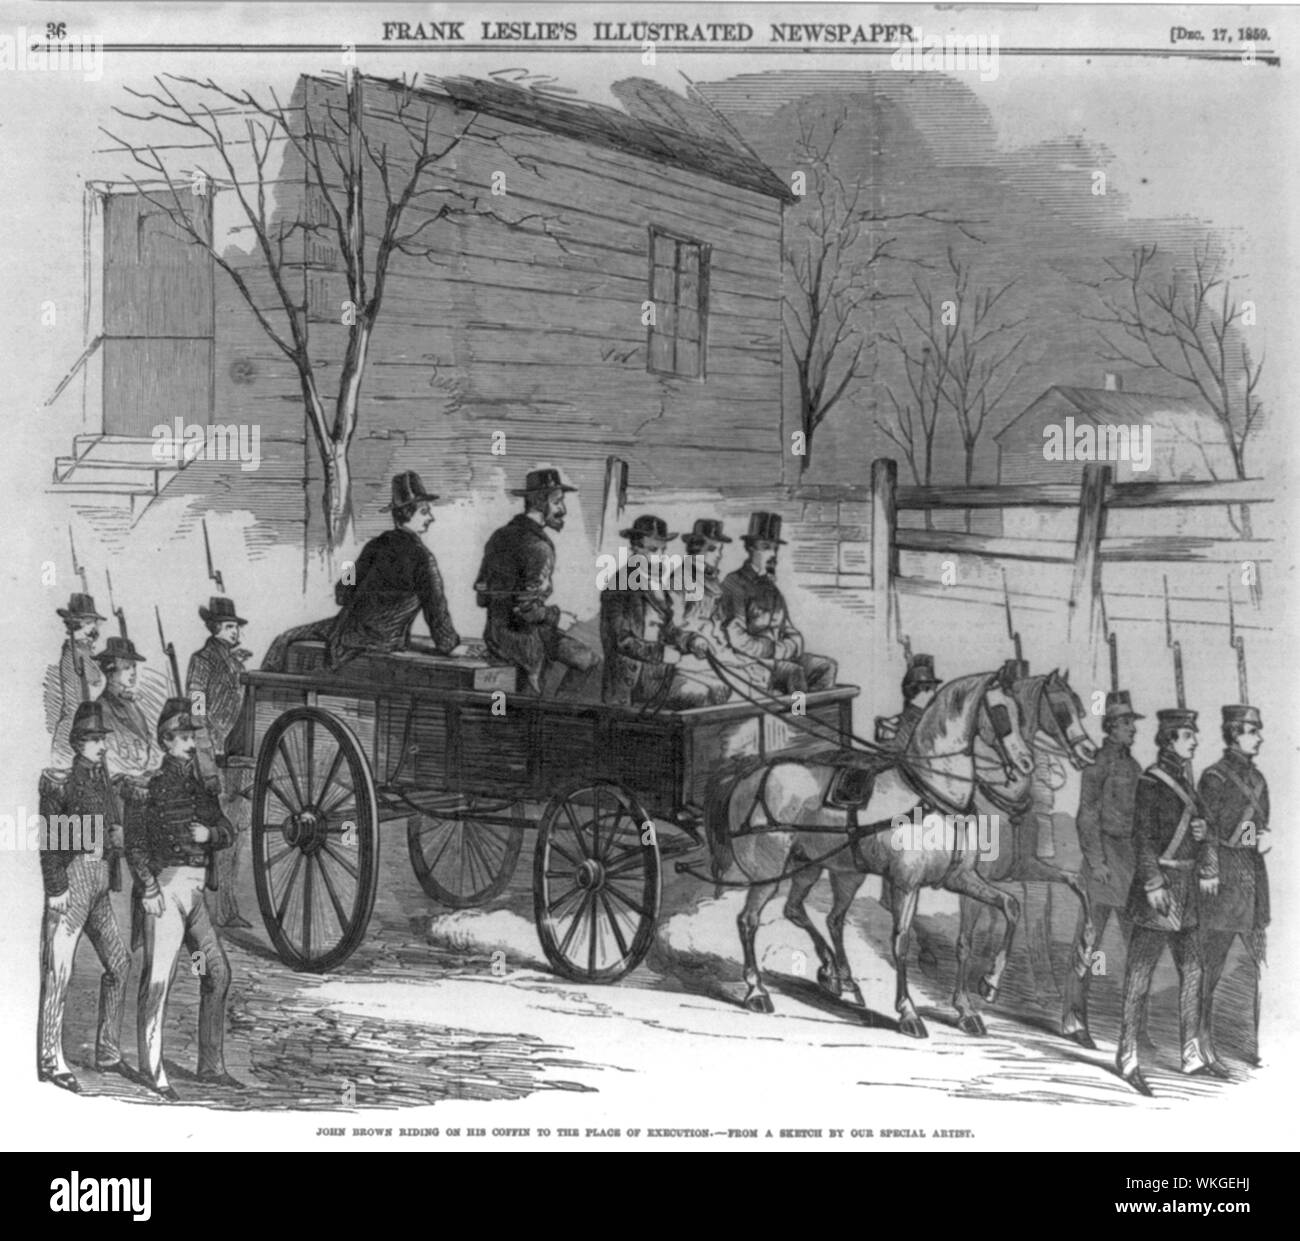 john-brown-riding-on-his-coffin-to-the-place-of-execution-charlestown-w-va-WKGEHJ.jpg